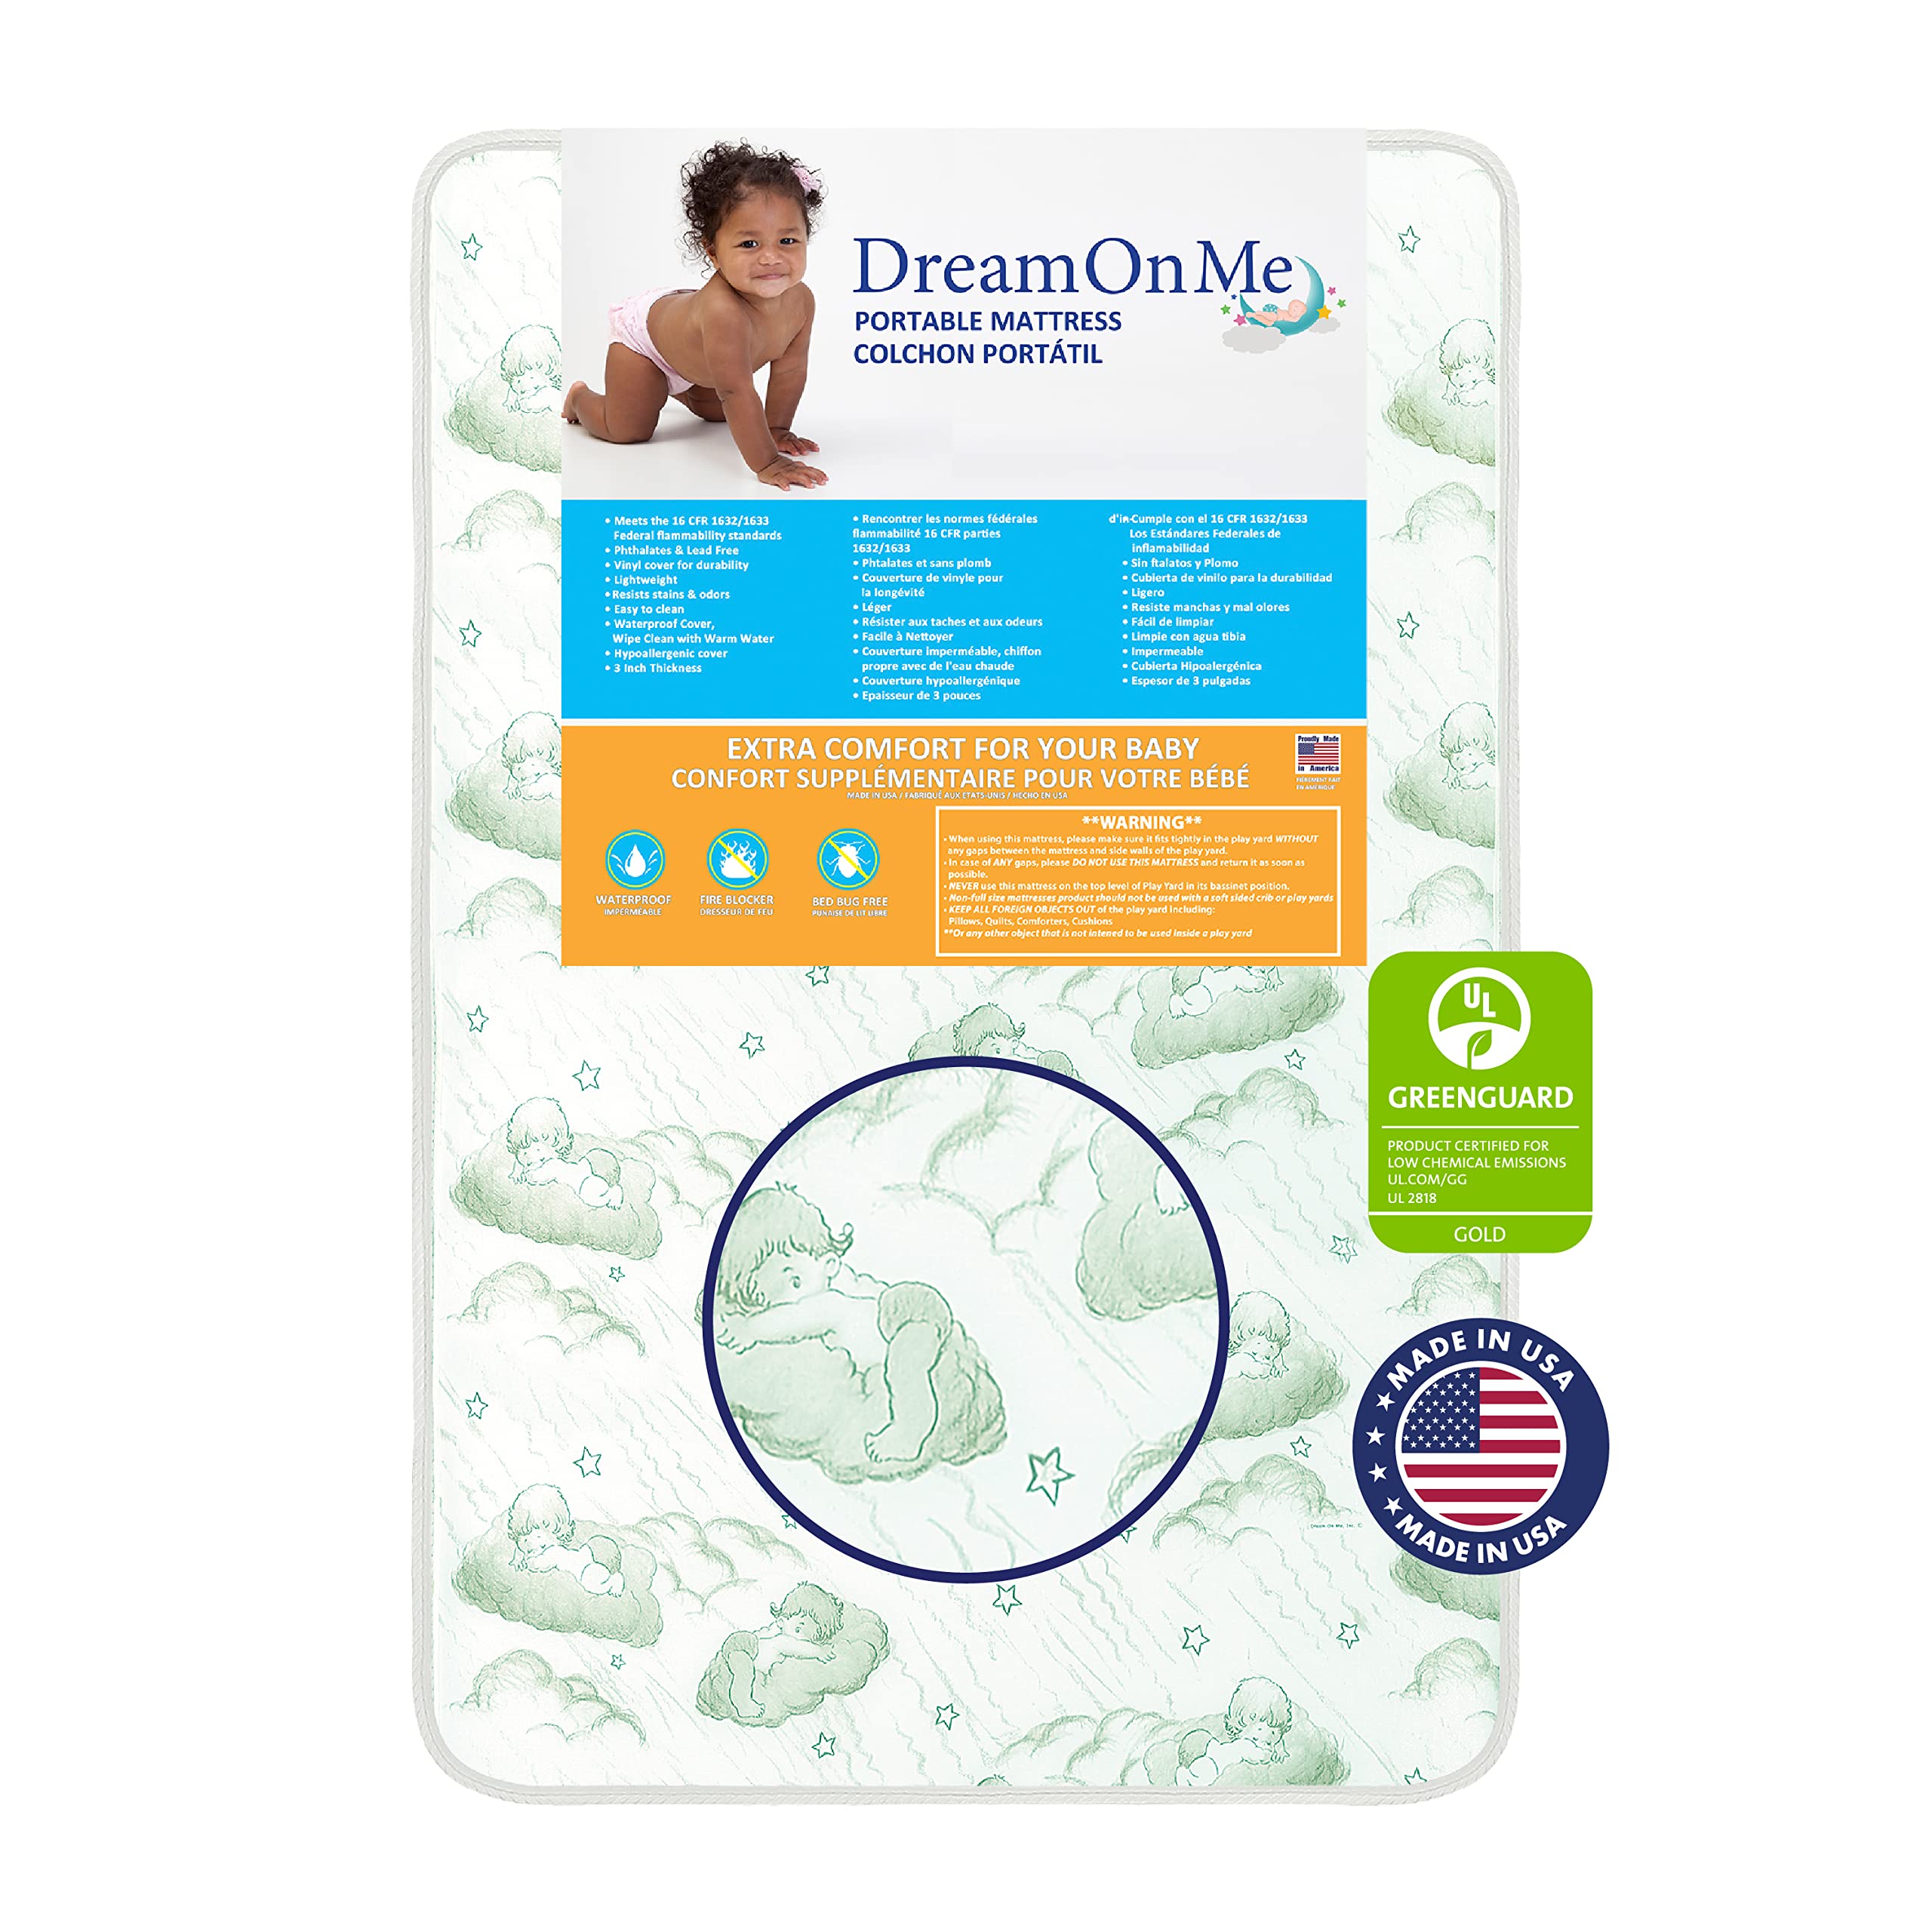 Dream On Me 3” Foam / Excellent support / Easy maintenance/ Greenguard Gold environment safe playmat